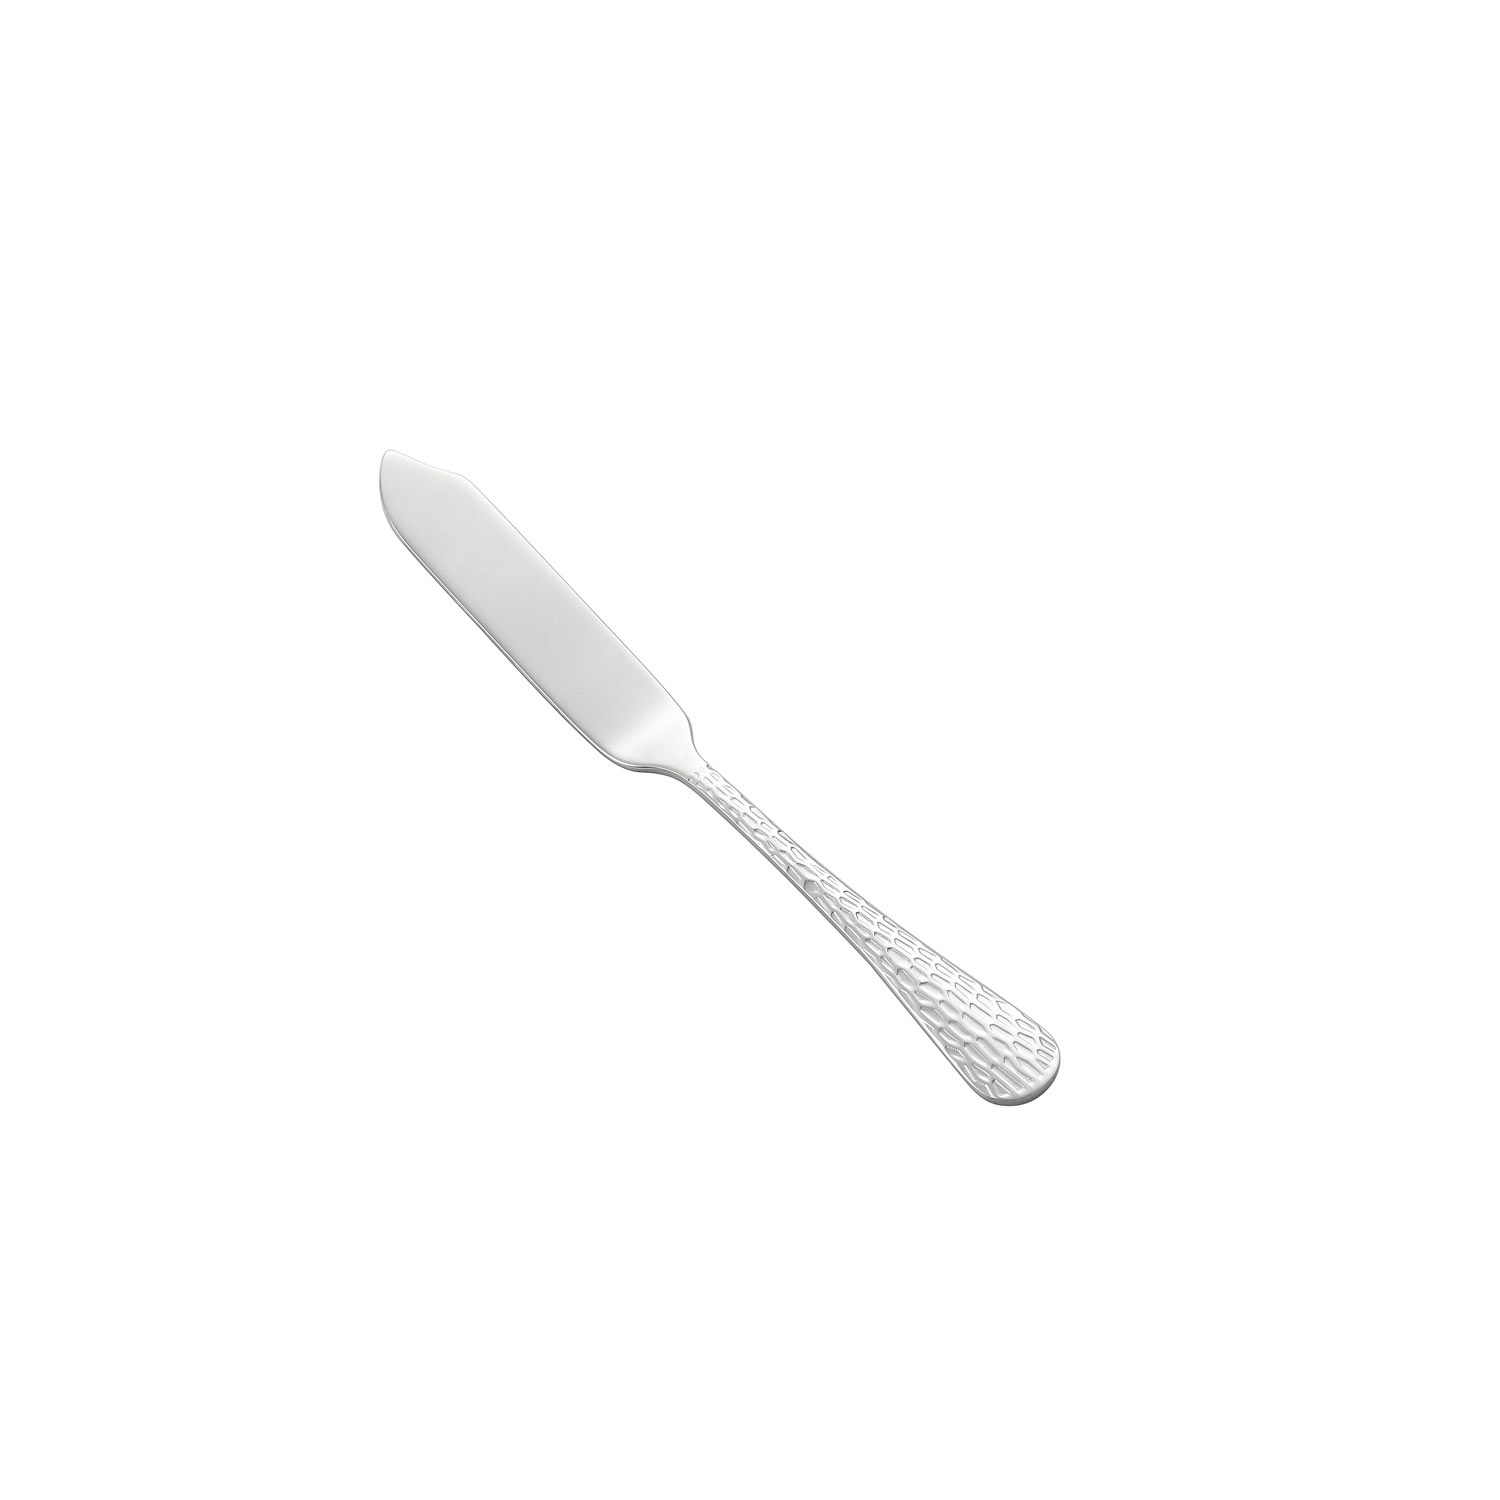 CAC China 3015-12 Celtic Butter Spreader, Heavyweight 18/0, 6-3/4"